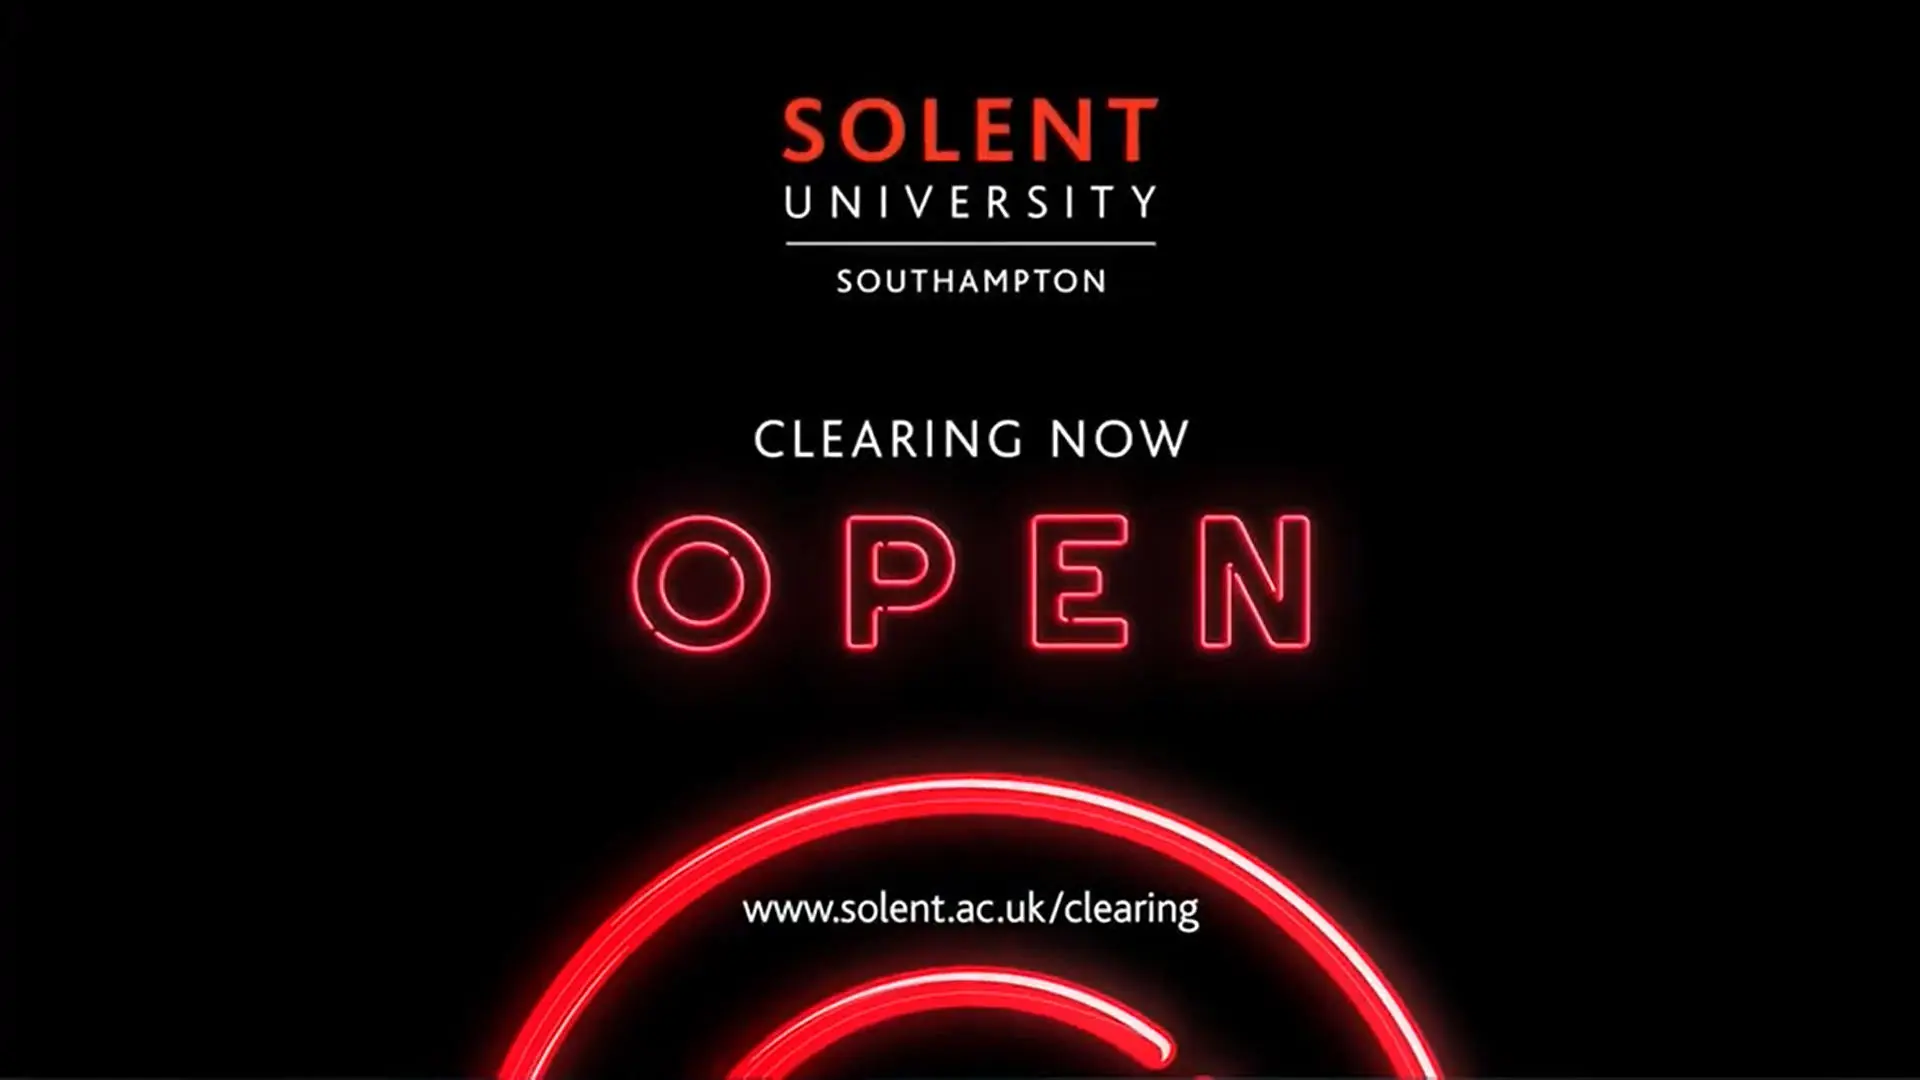 A graphic that says, 'Clearing now open', www.solent.ac.uk/clearing, with the Solent University, Southampton logo at the top and a red neon semi-circle at the bottom.